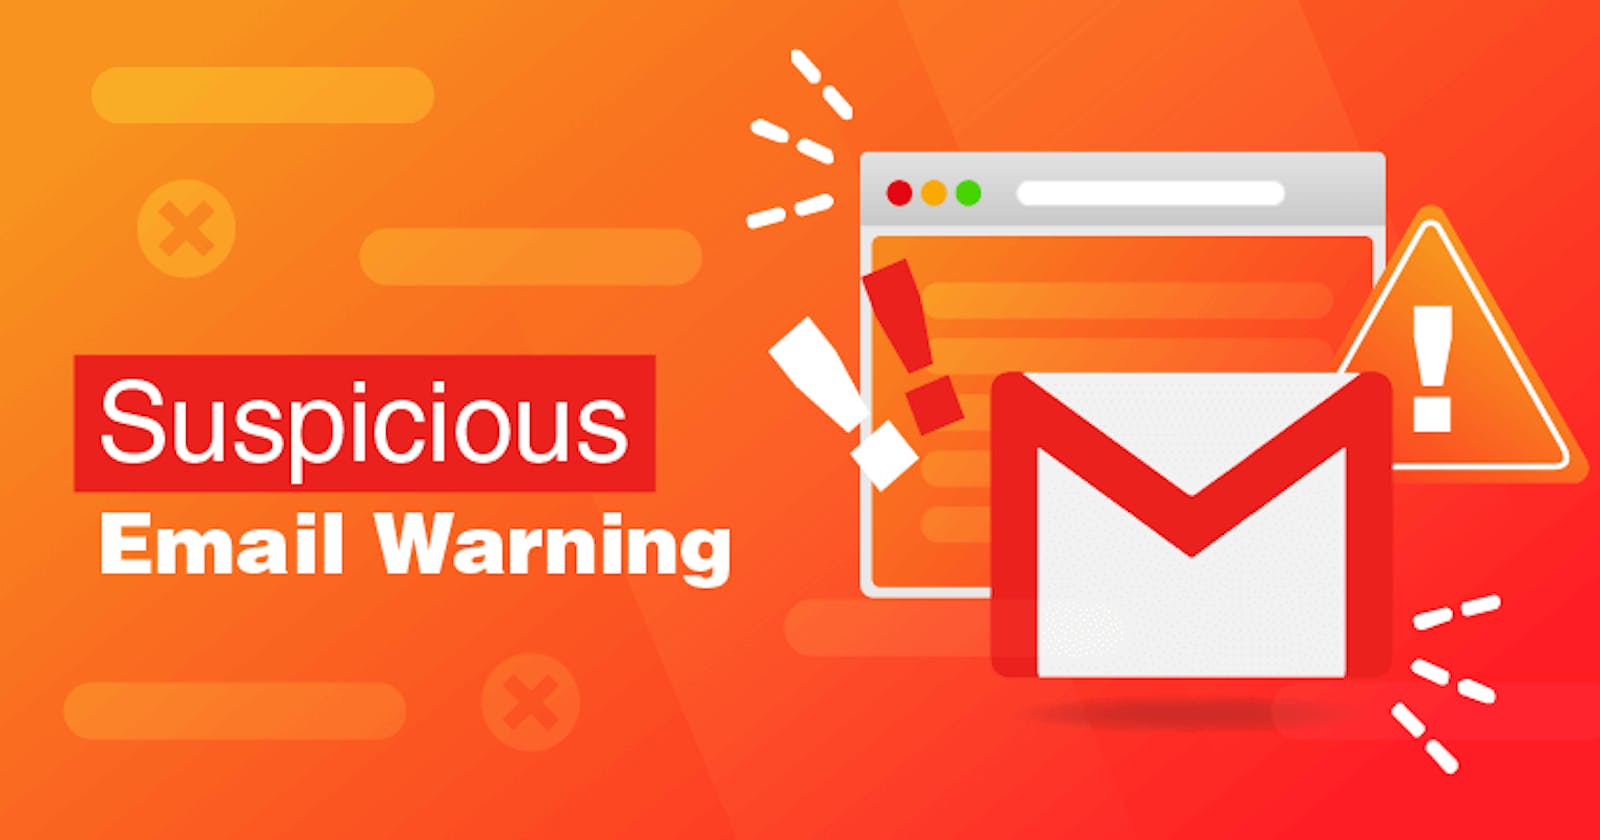 [Heads Up] New Phishing Threat Infographic: Your Users Are Failing Security and HR-Related Attacks